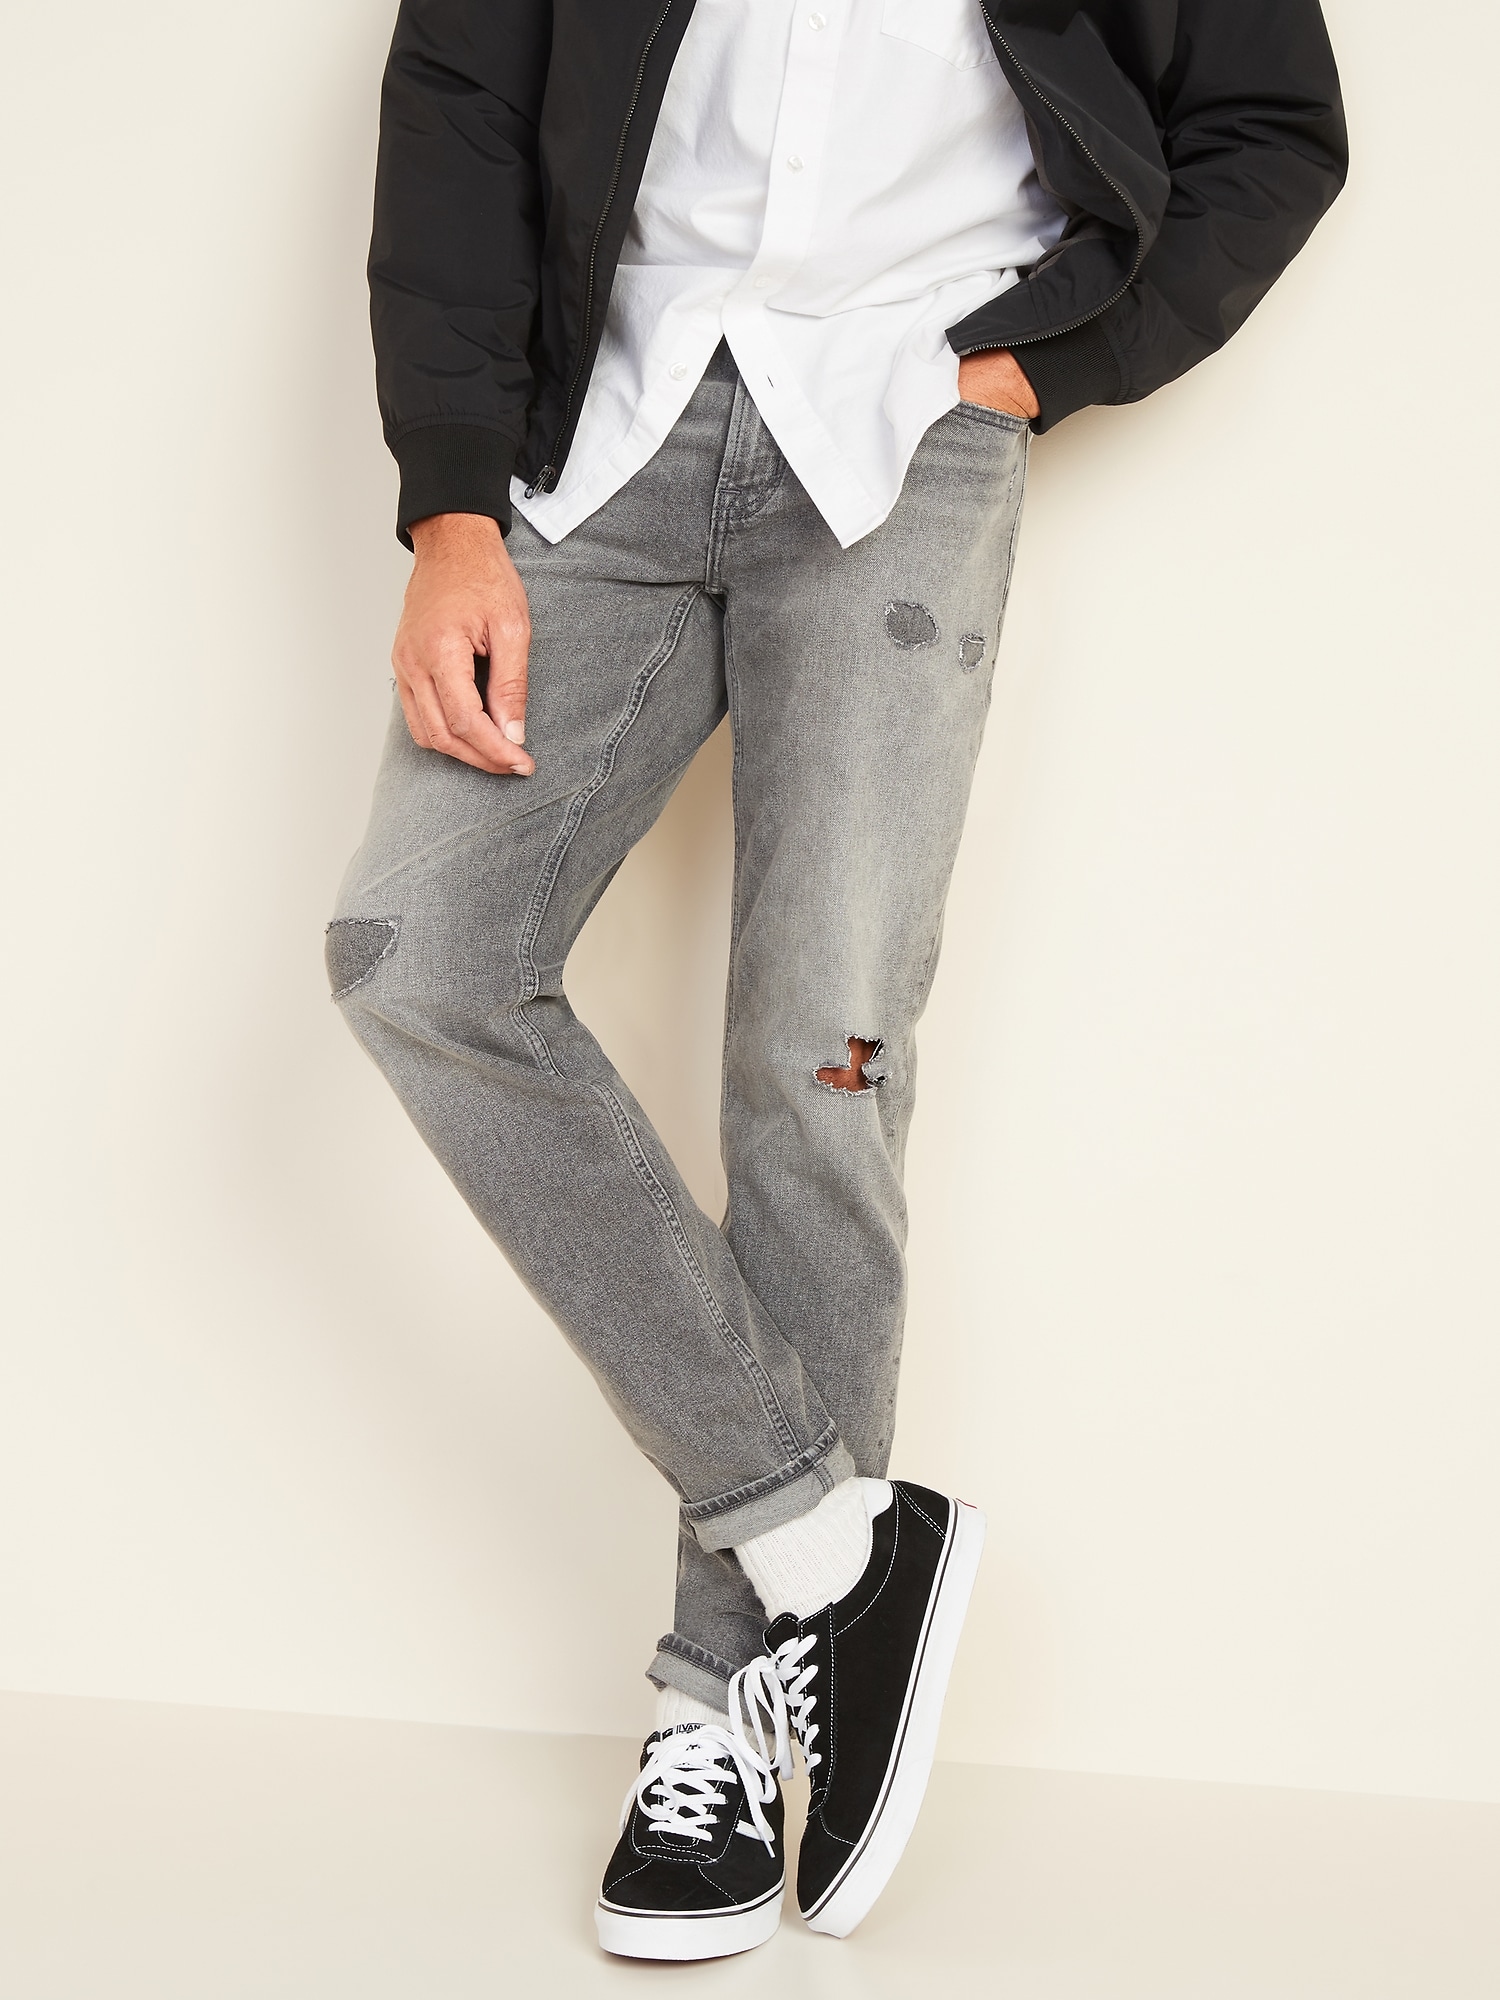 ripped tapered jeans mens